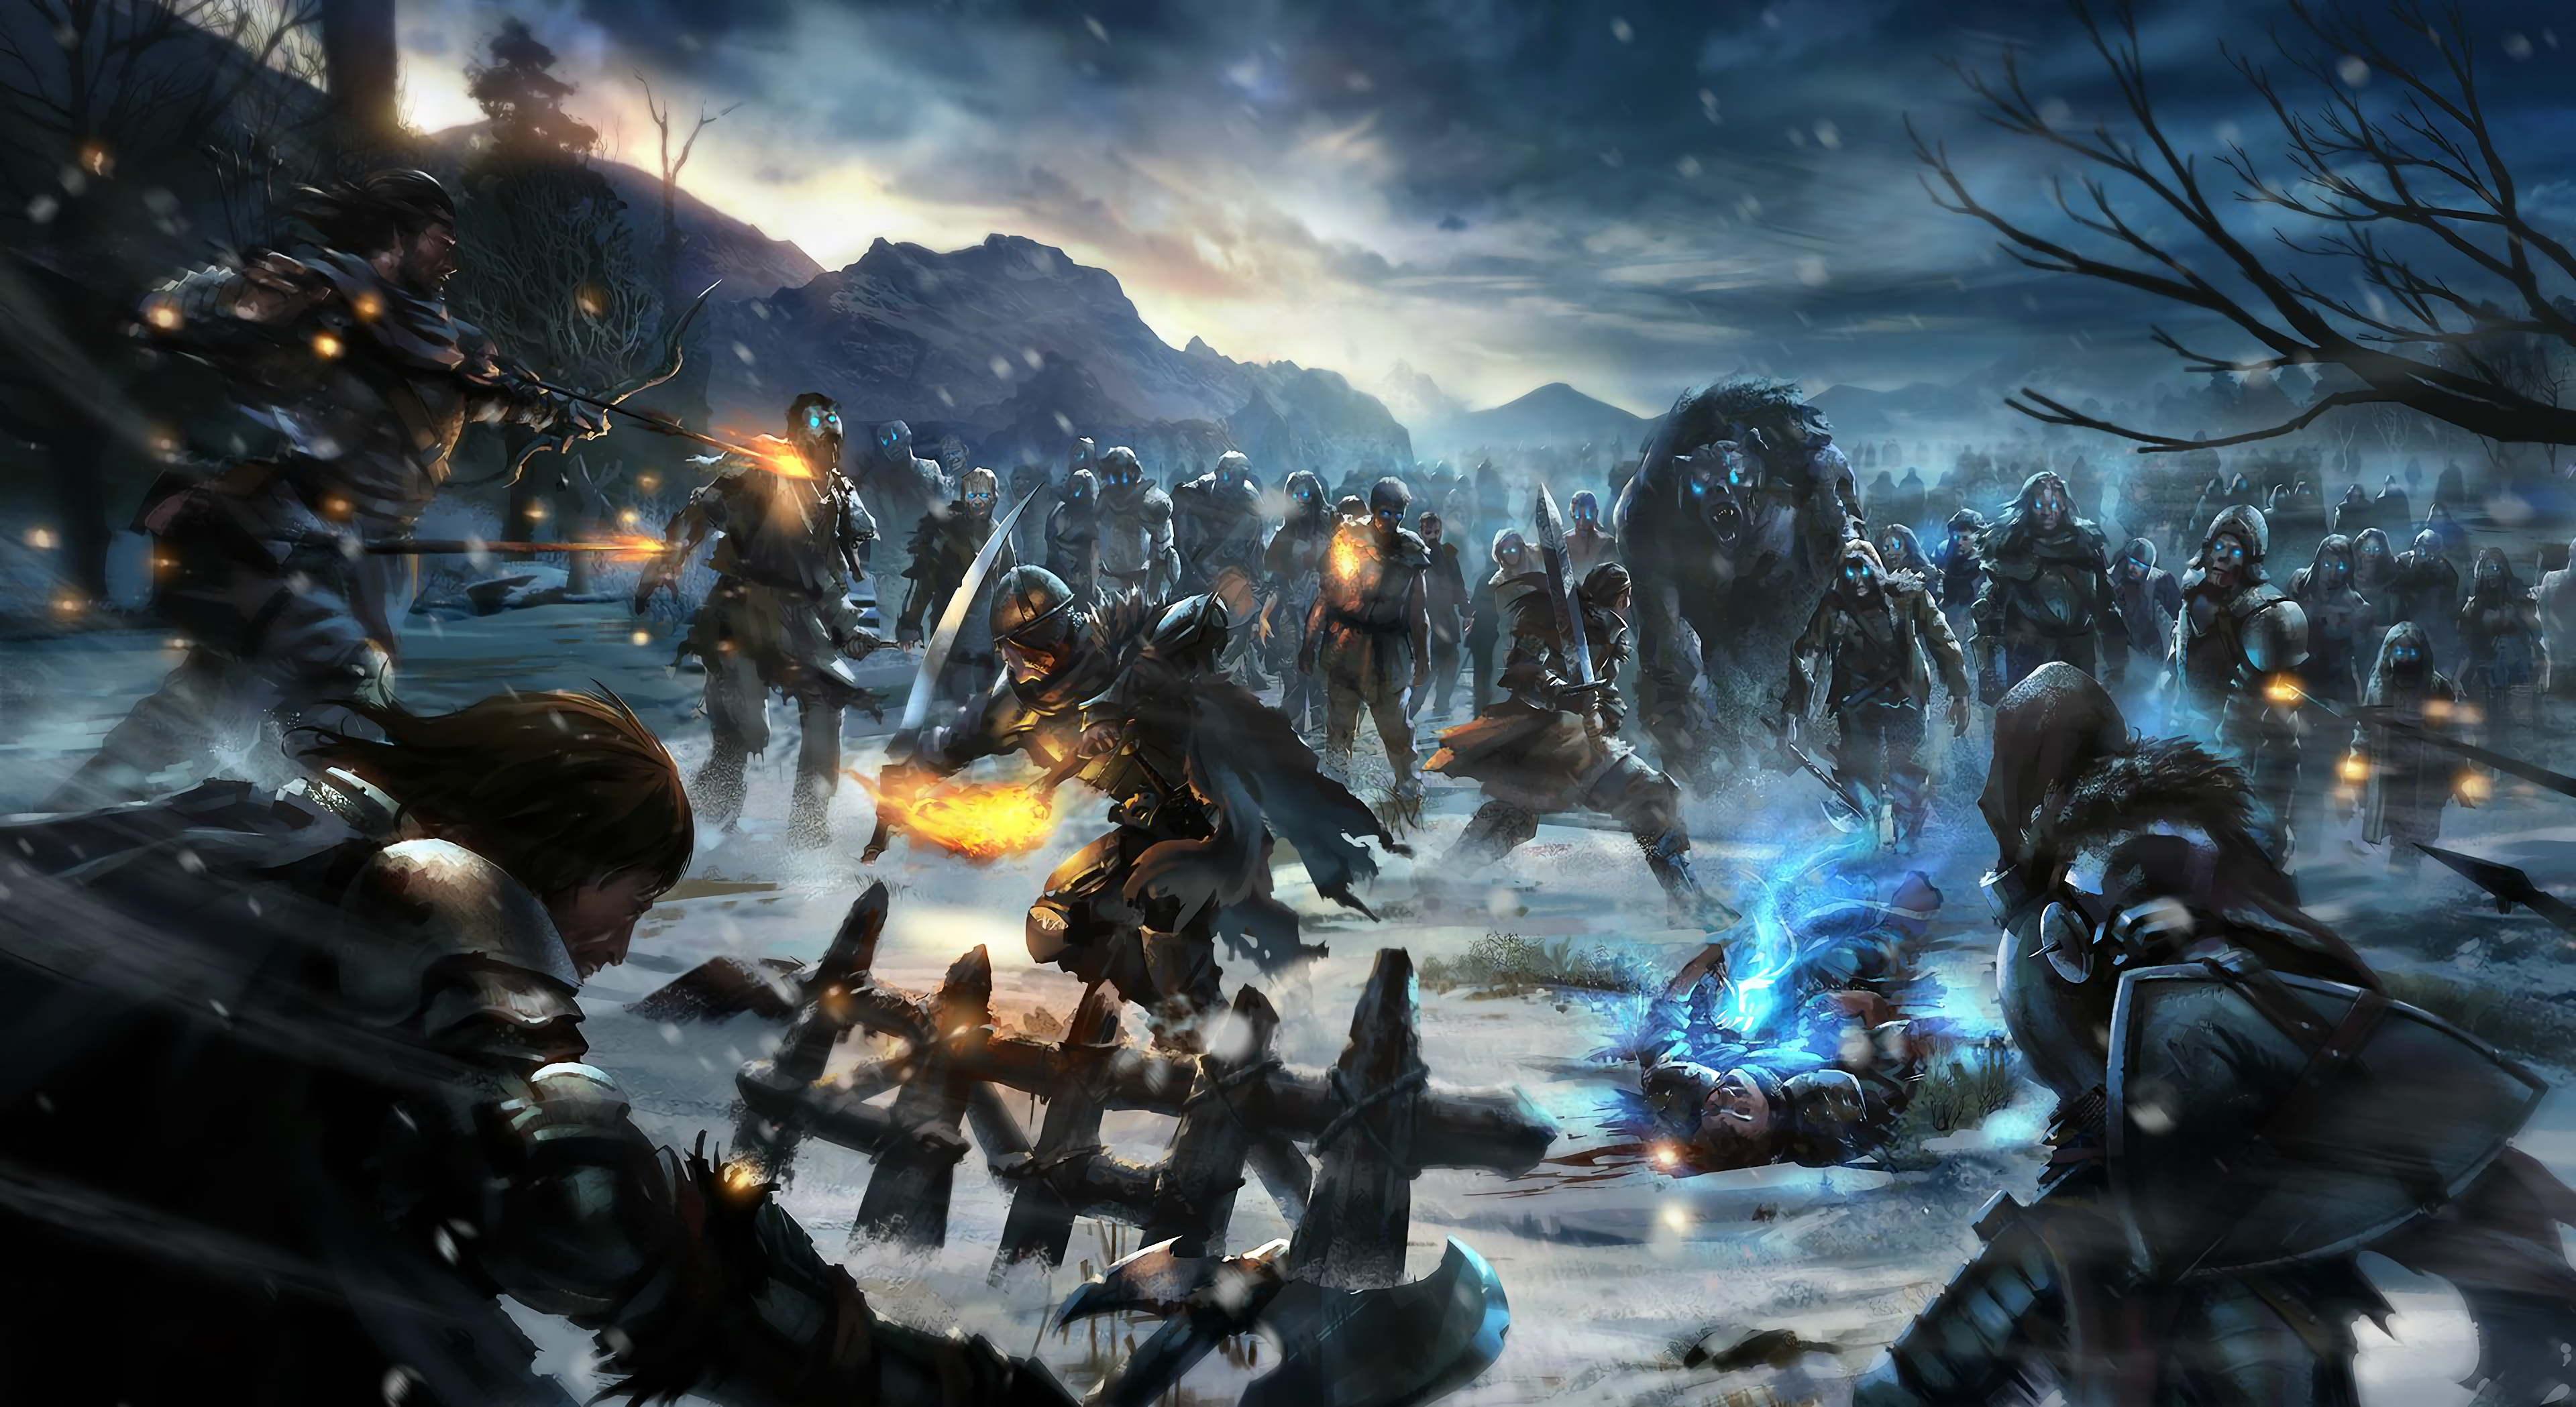 General 3840x2098 A Song of Ice and Fire fantasy art battle artwork